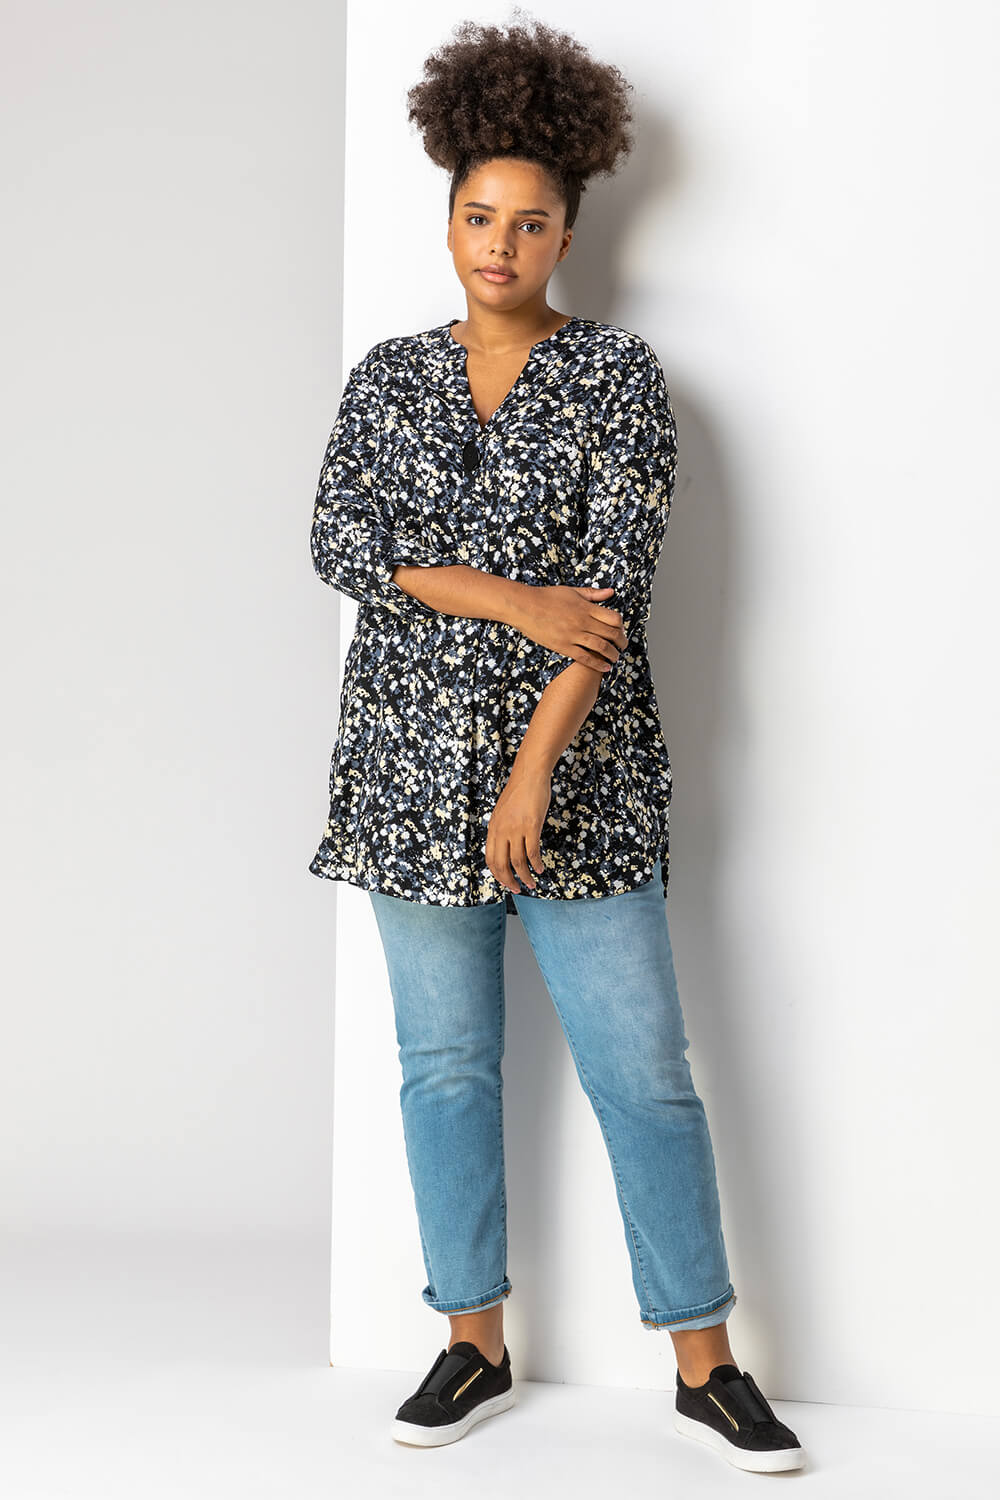 Black Curve Floral Print Tunic Top, Image 3 of 5